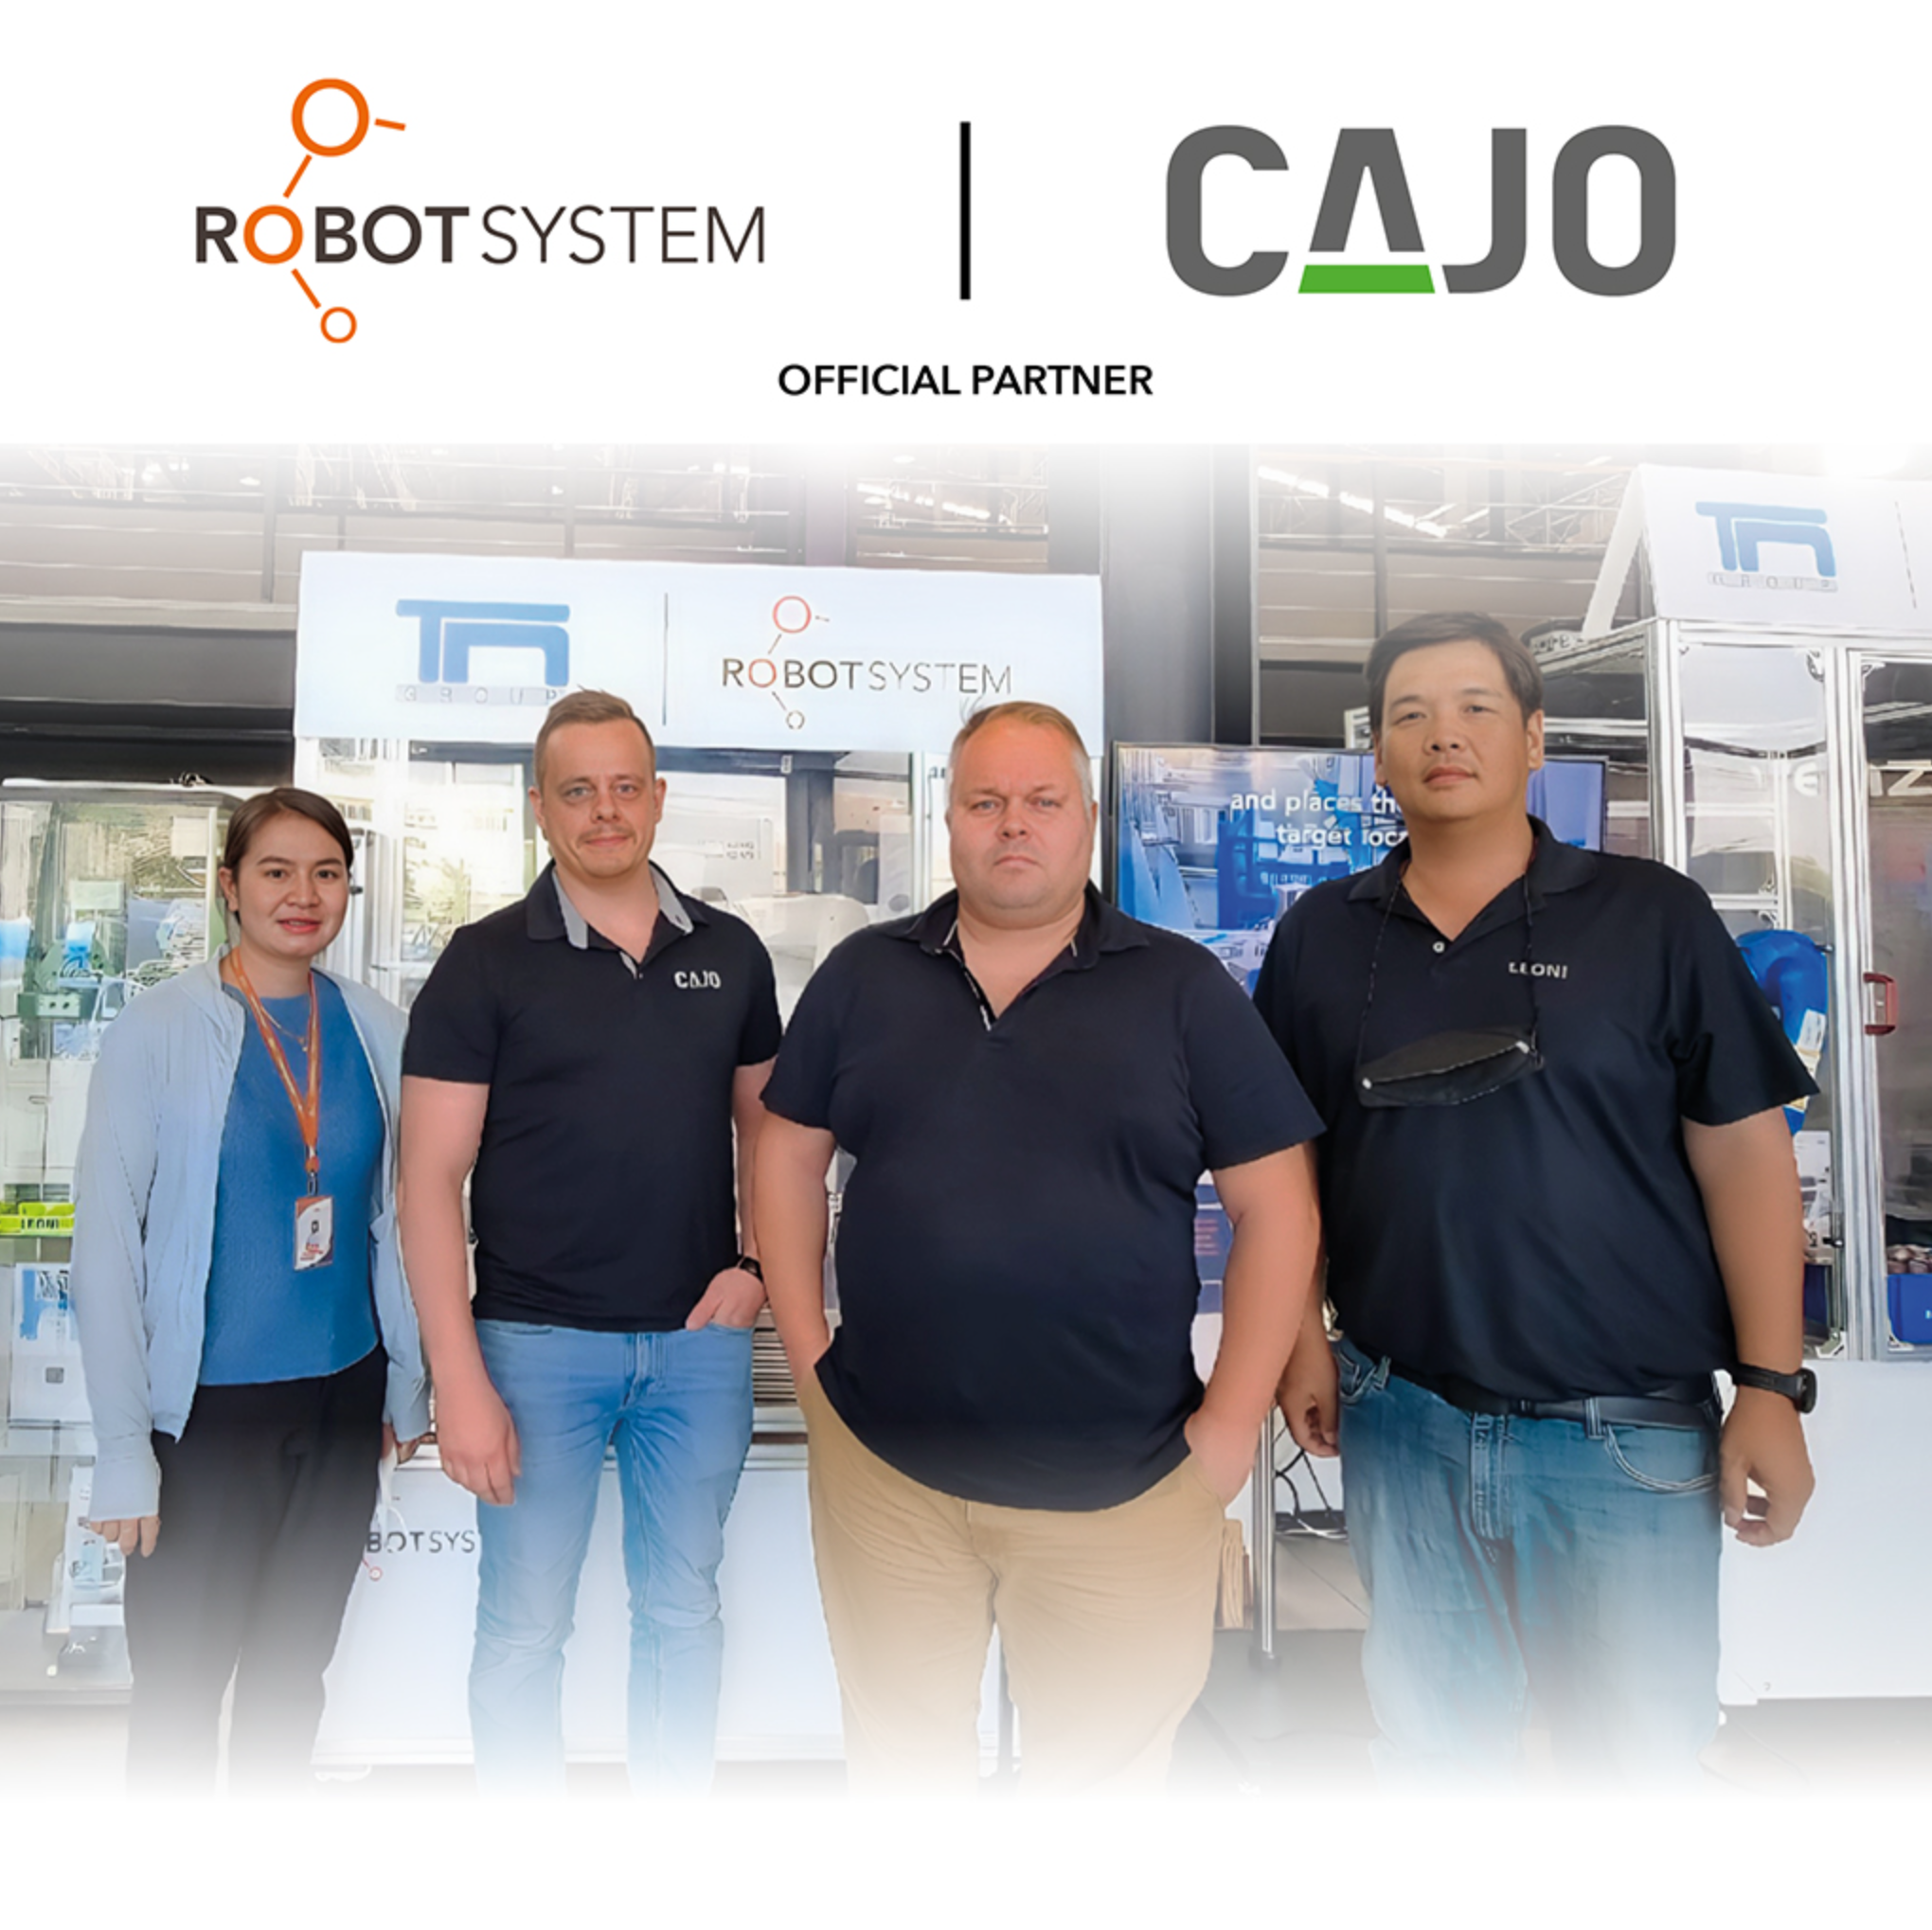 Cajo partners with Robot Systems